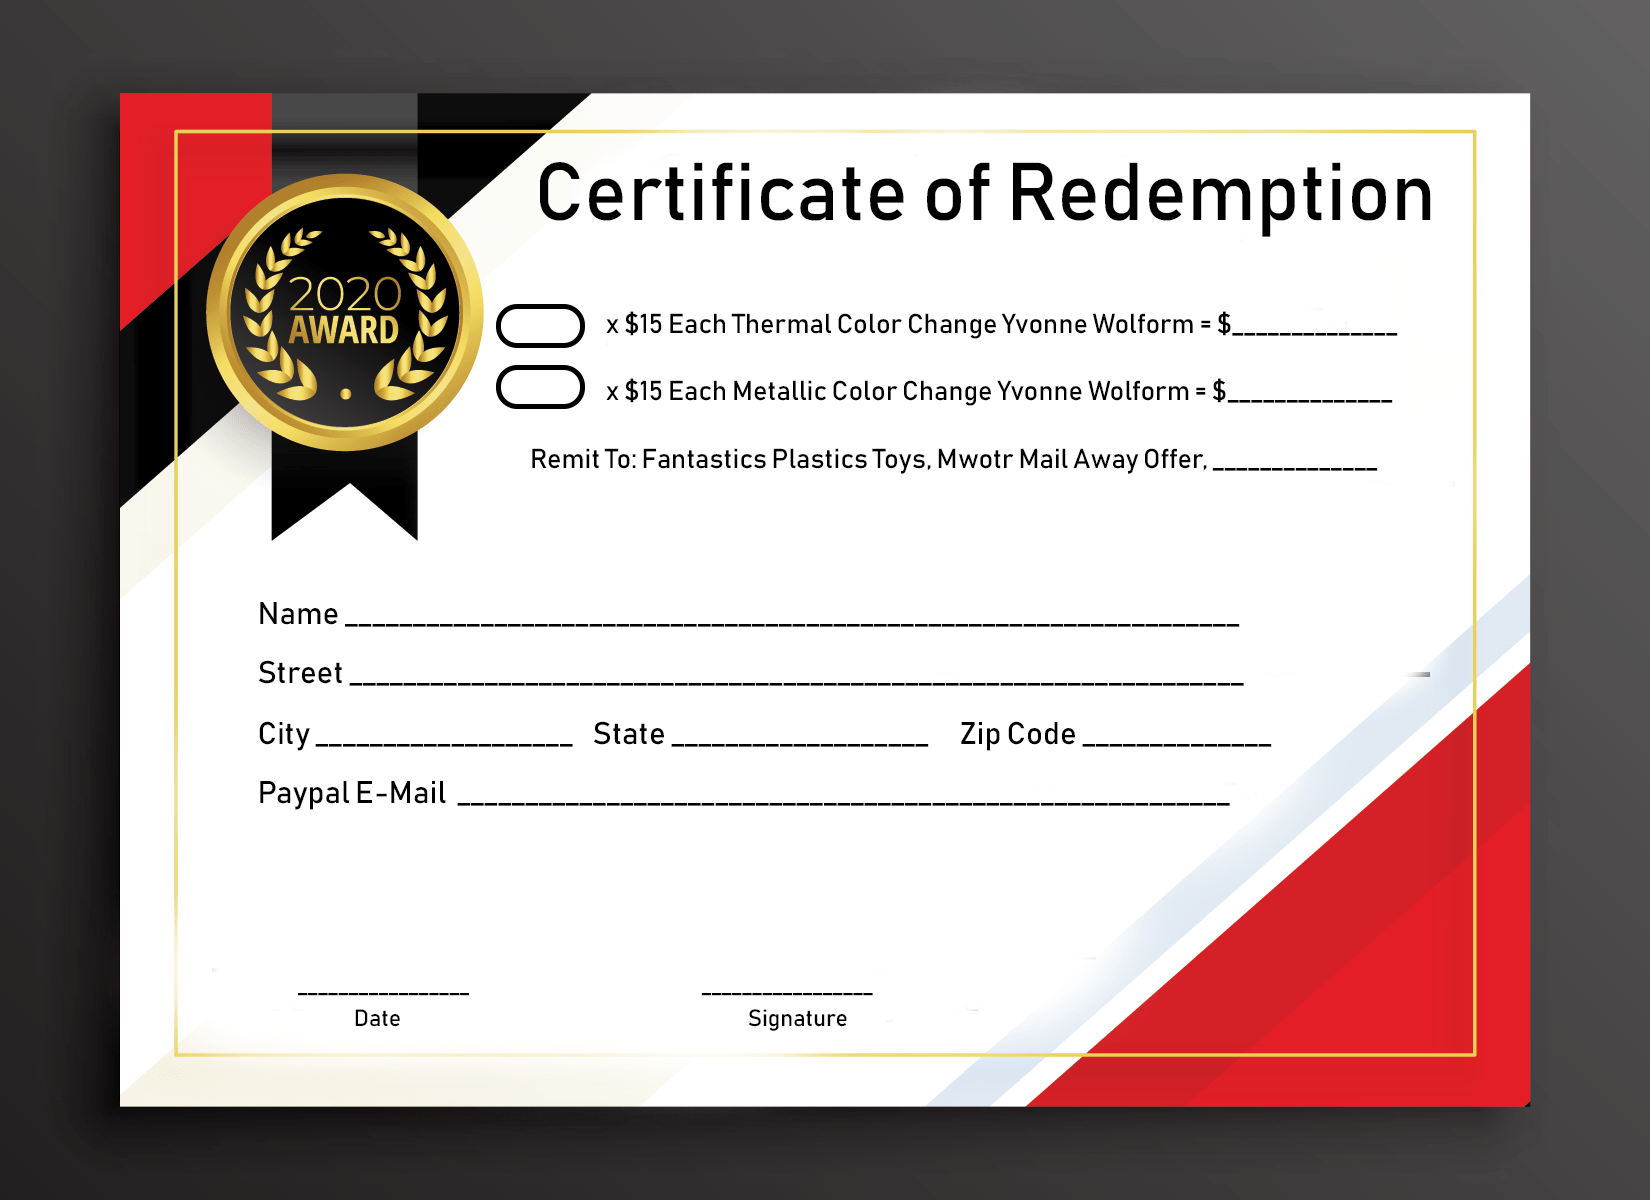 What is a Certificate of Redemption